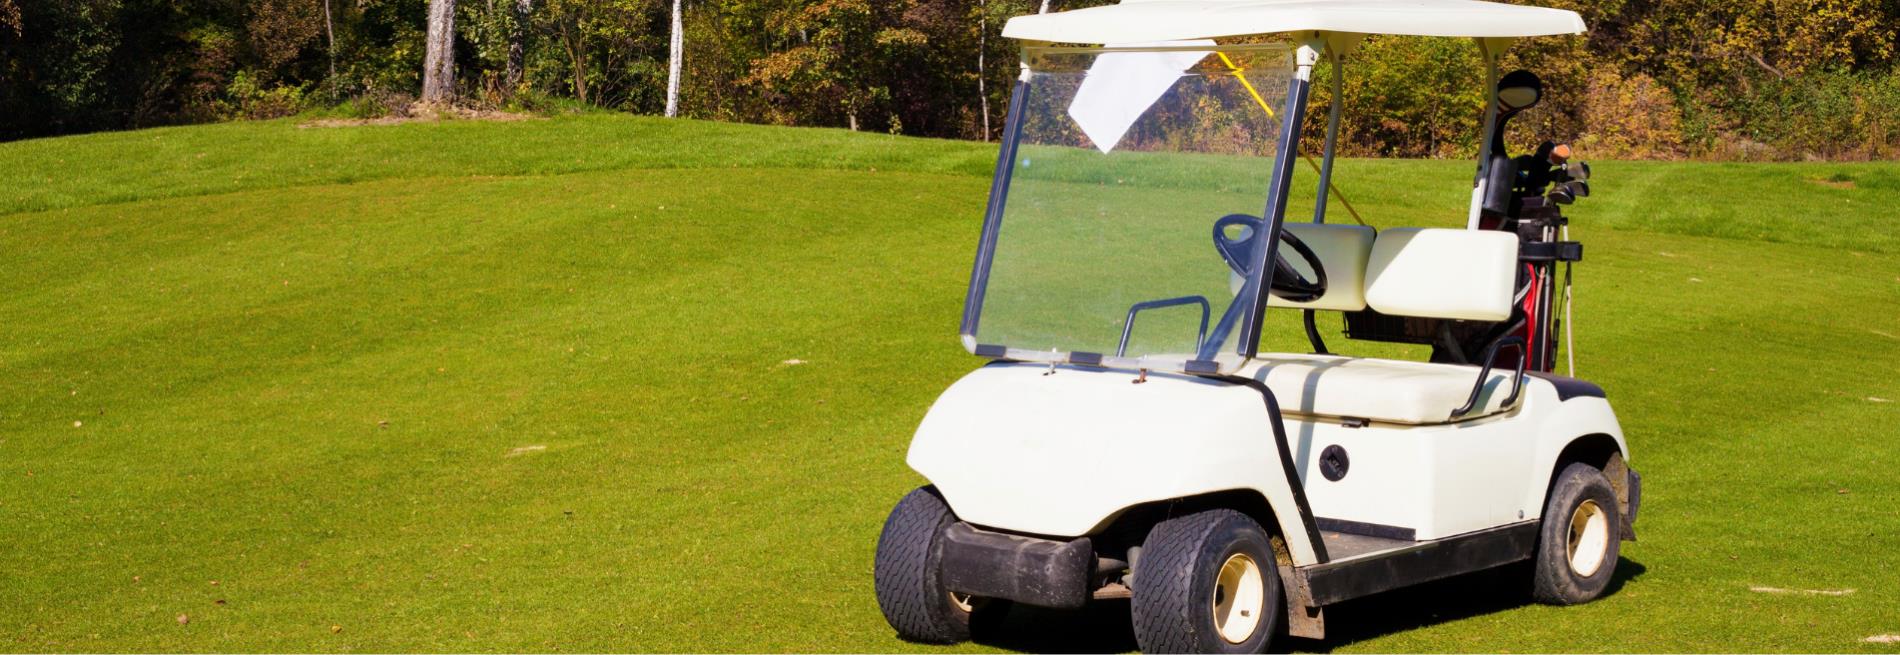 banner-golf-car-nuove-usate-giugno-000.png